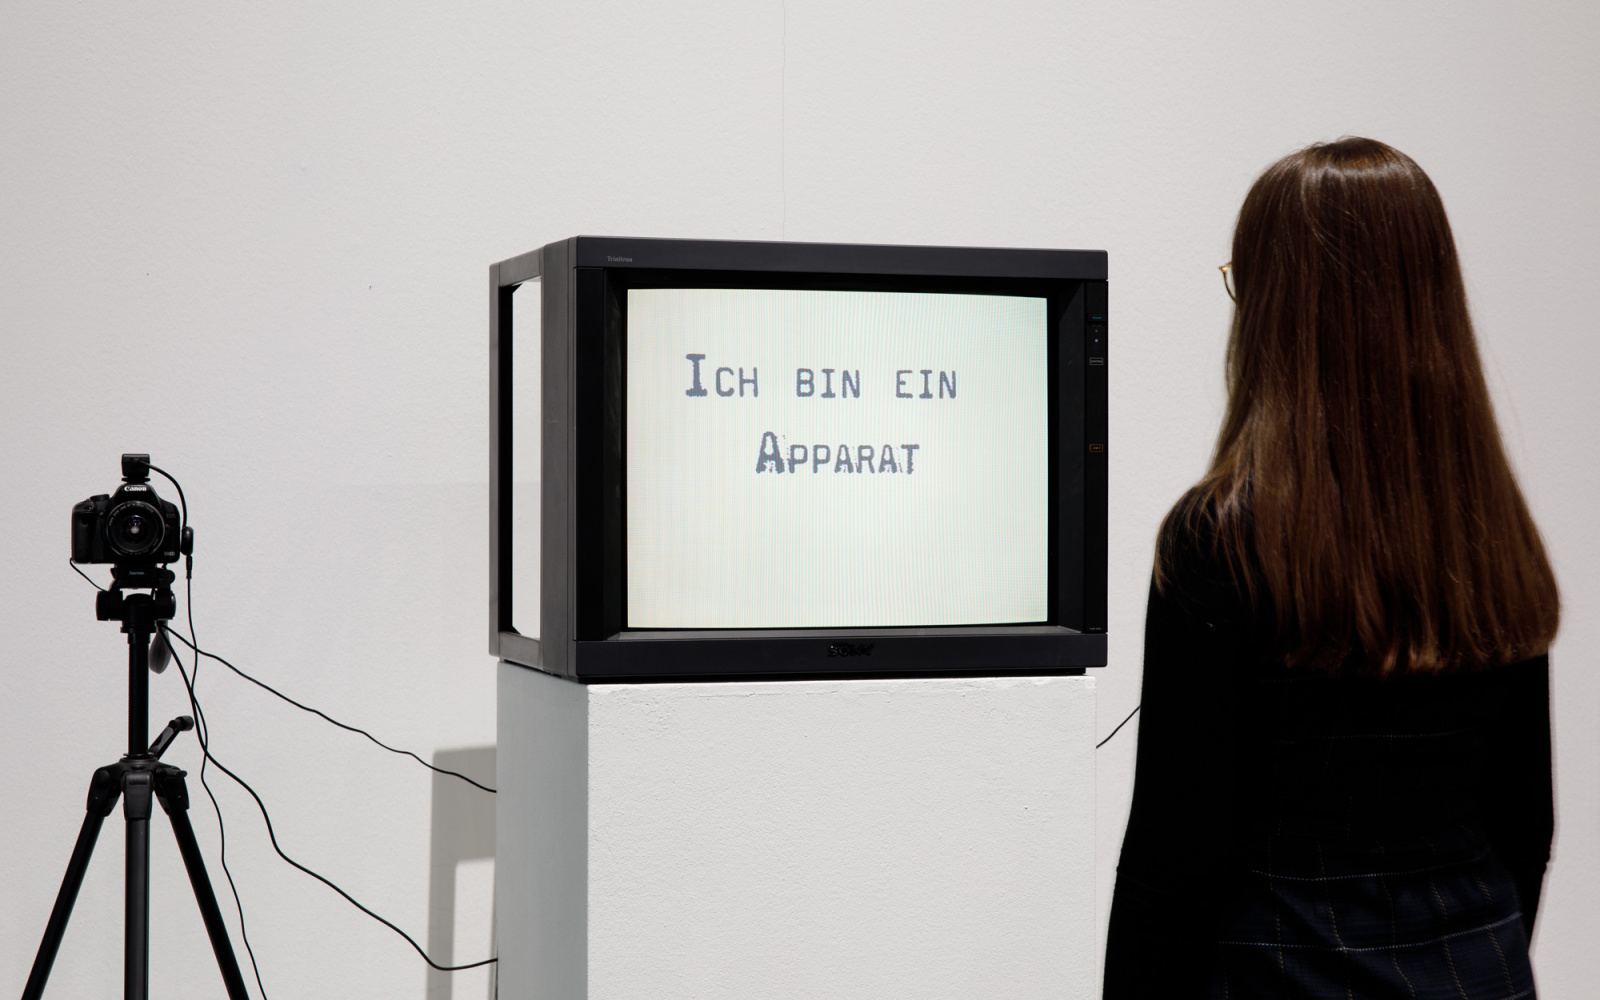 On the left a photo camera. in the middle at eye level a television screen. On the display the inscription: »Ich bin ein Apparat« (I am an apparatus). On the right there is a brown-haired woman, looking at the screen, her back to the viewer.